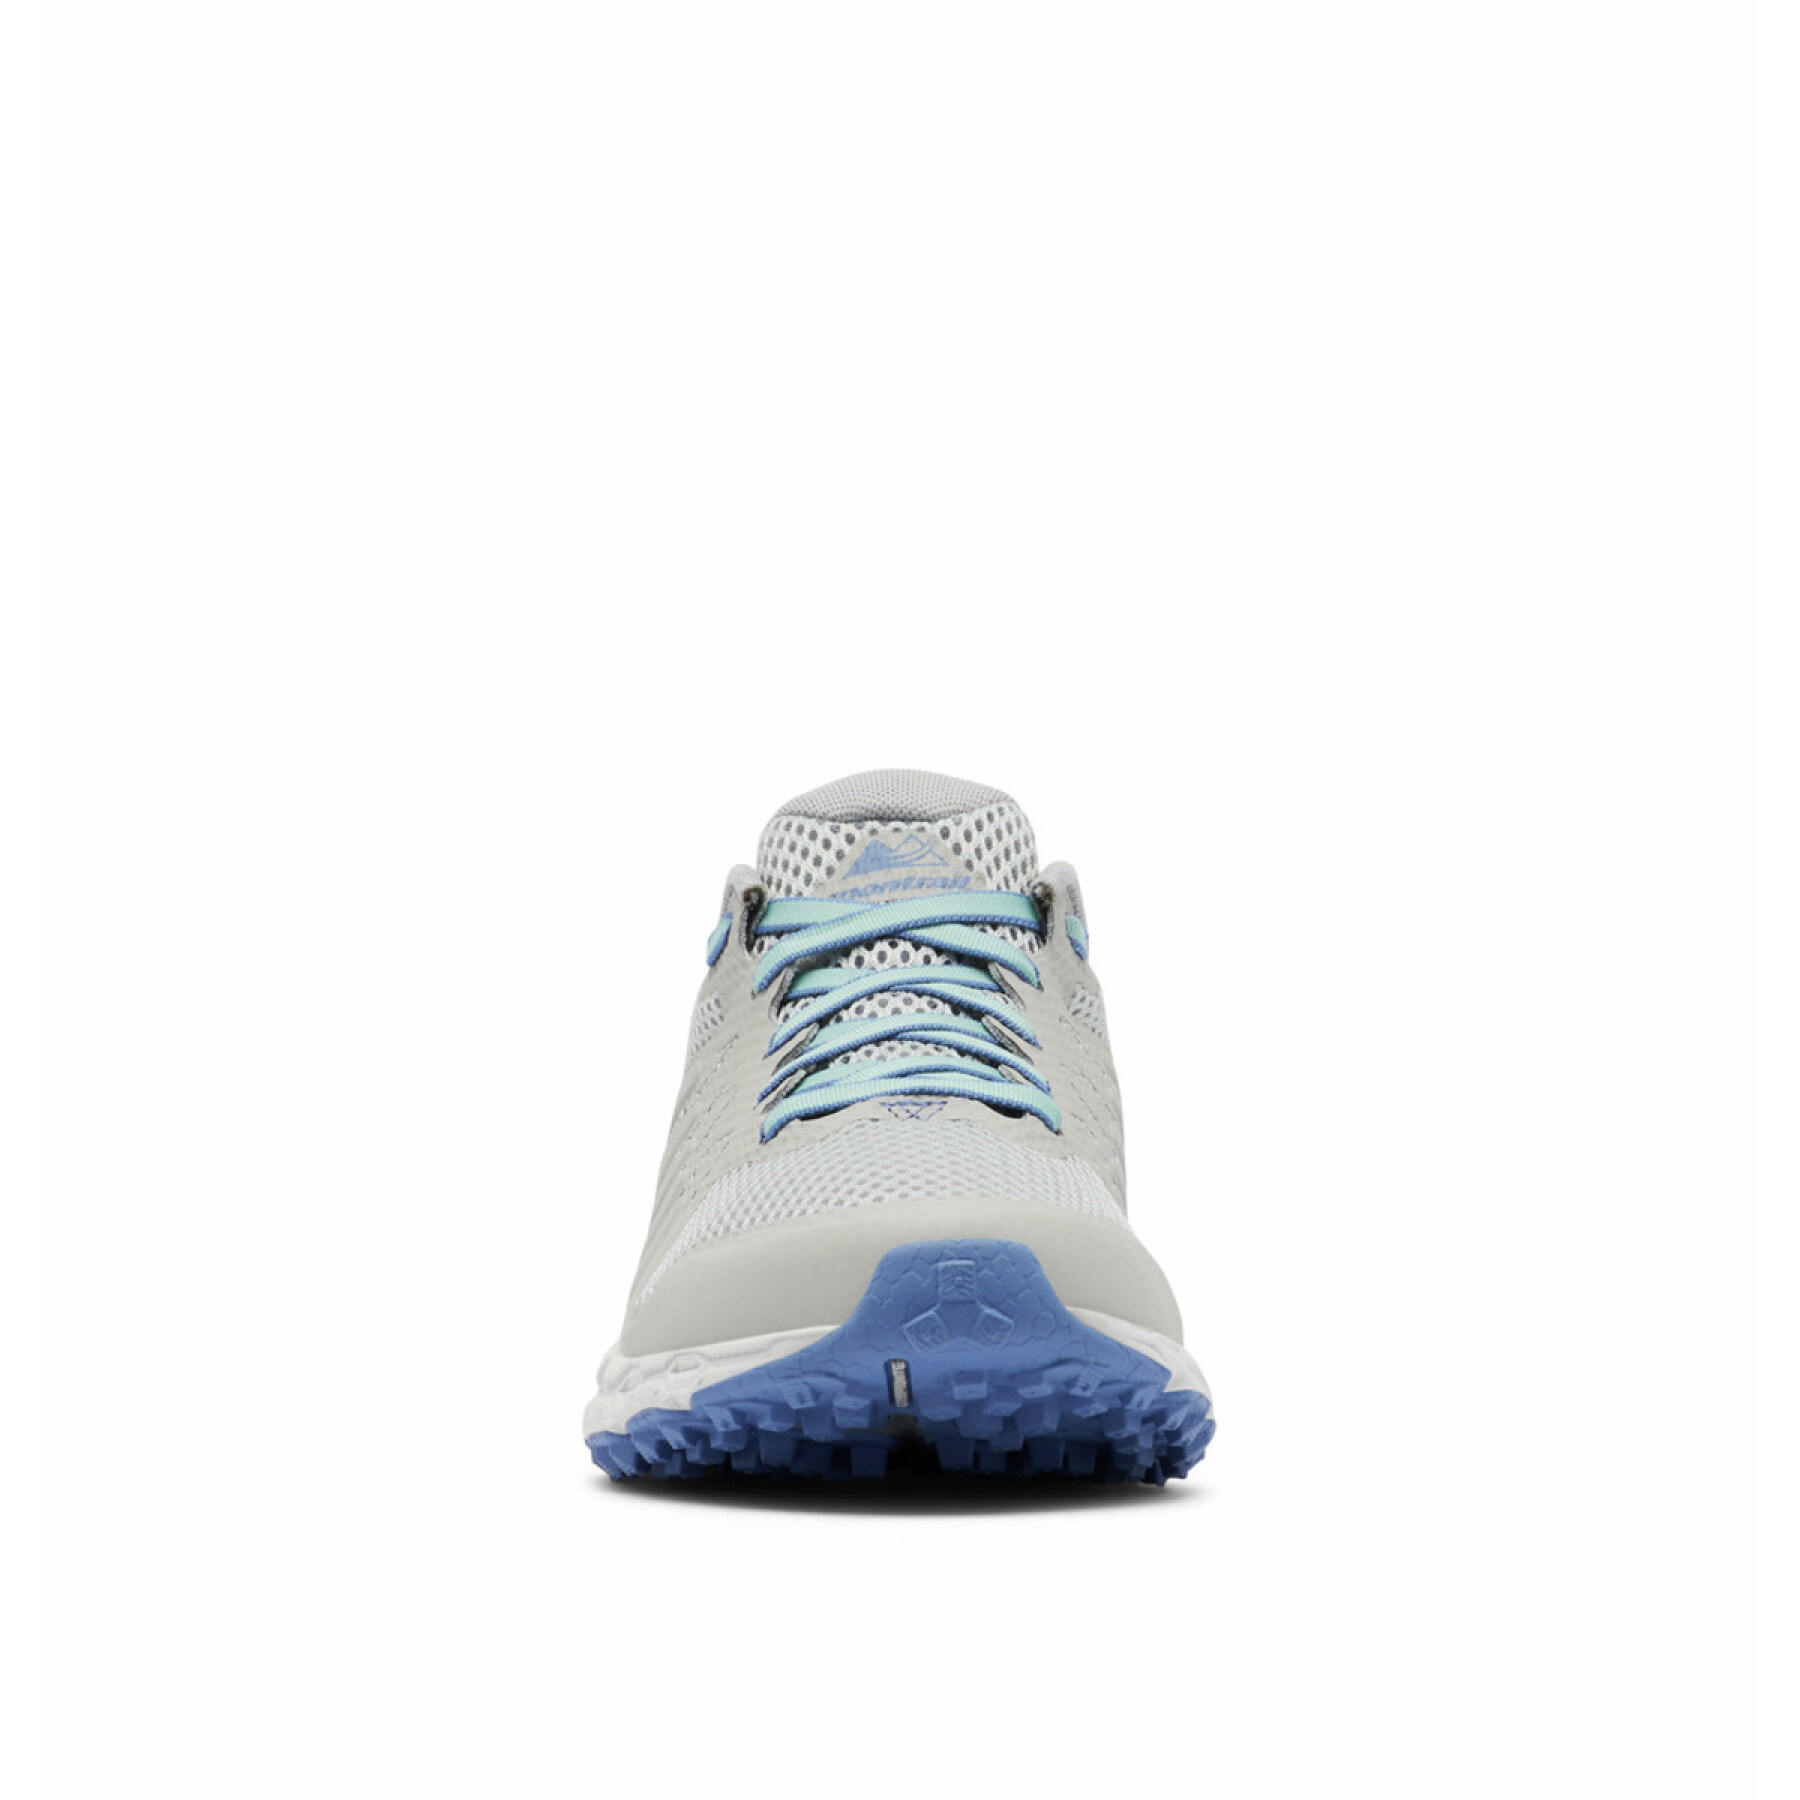 Zapatos de mujer Columbia MONTRAIL F.K.T. ATTEMPT